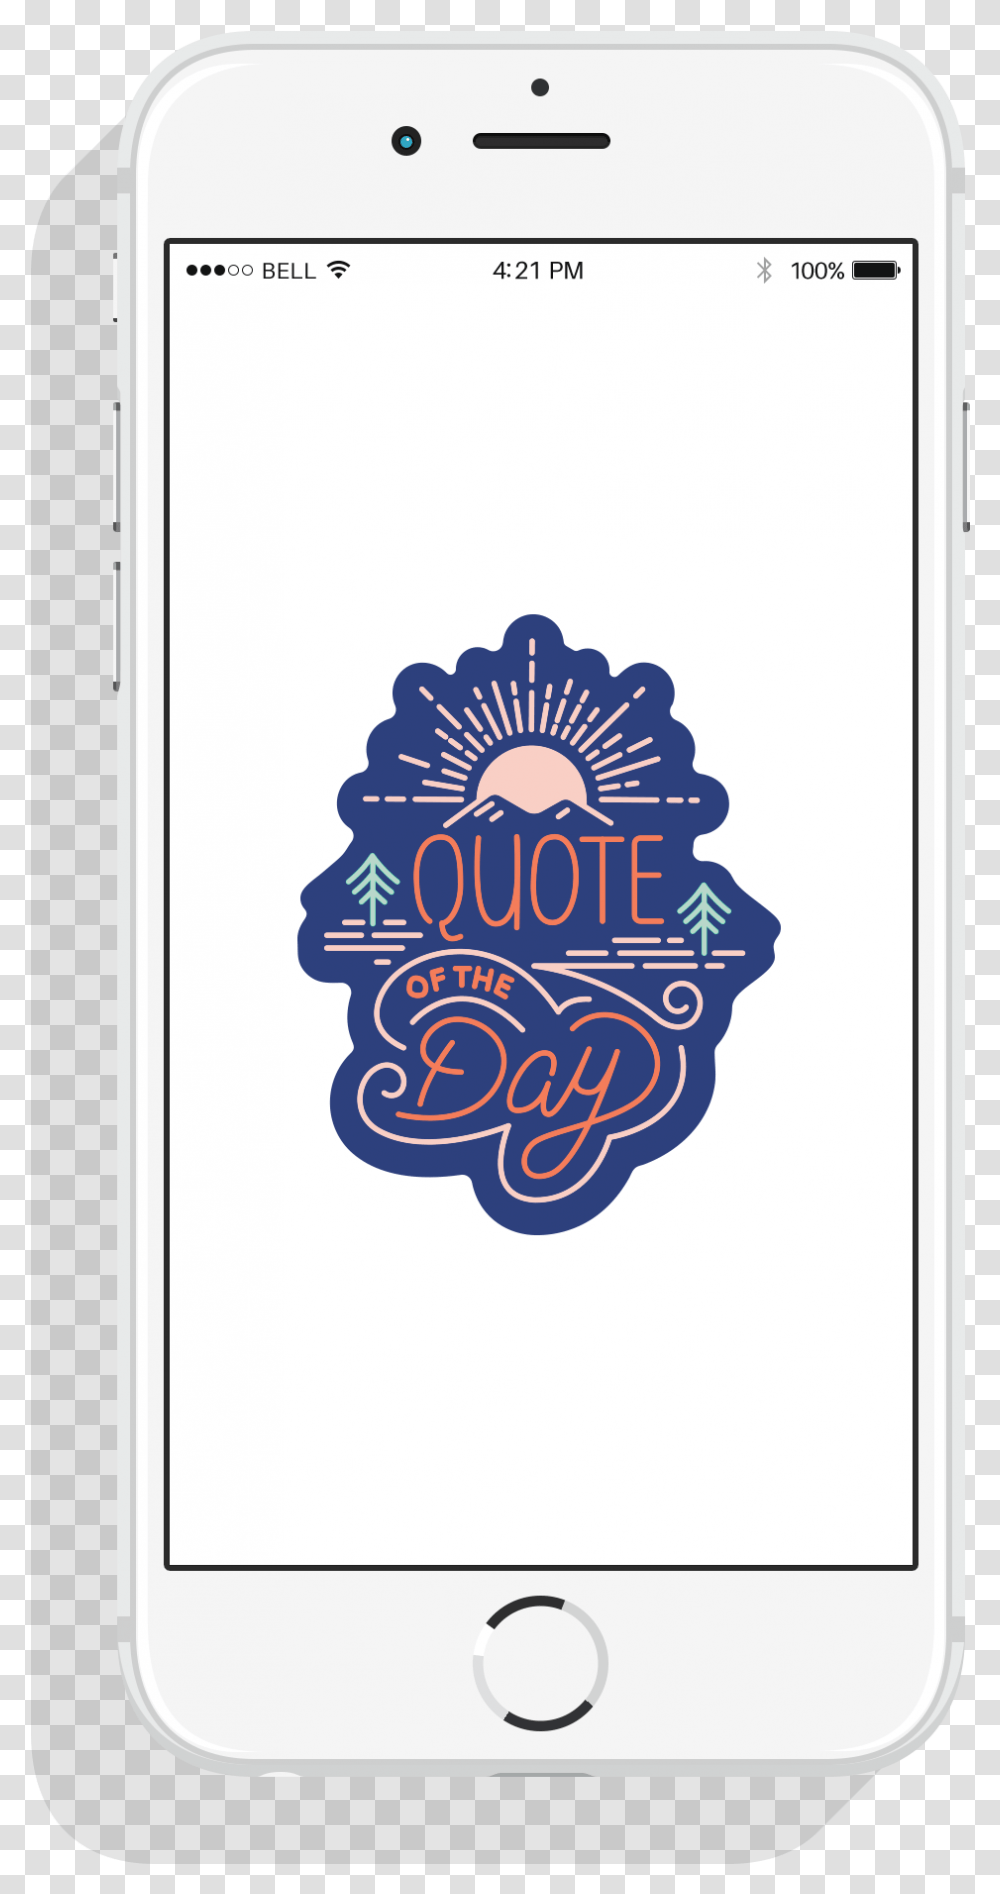 Lettering Design For The Share It App Illustration, Mobile Phone, Electronics, Cell Phone Transparent Png